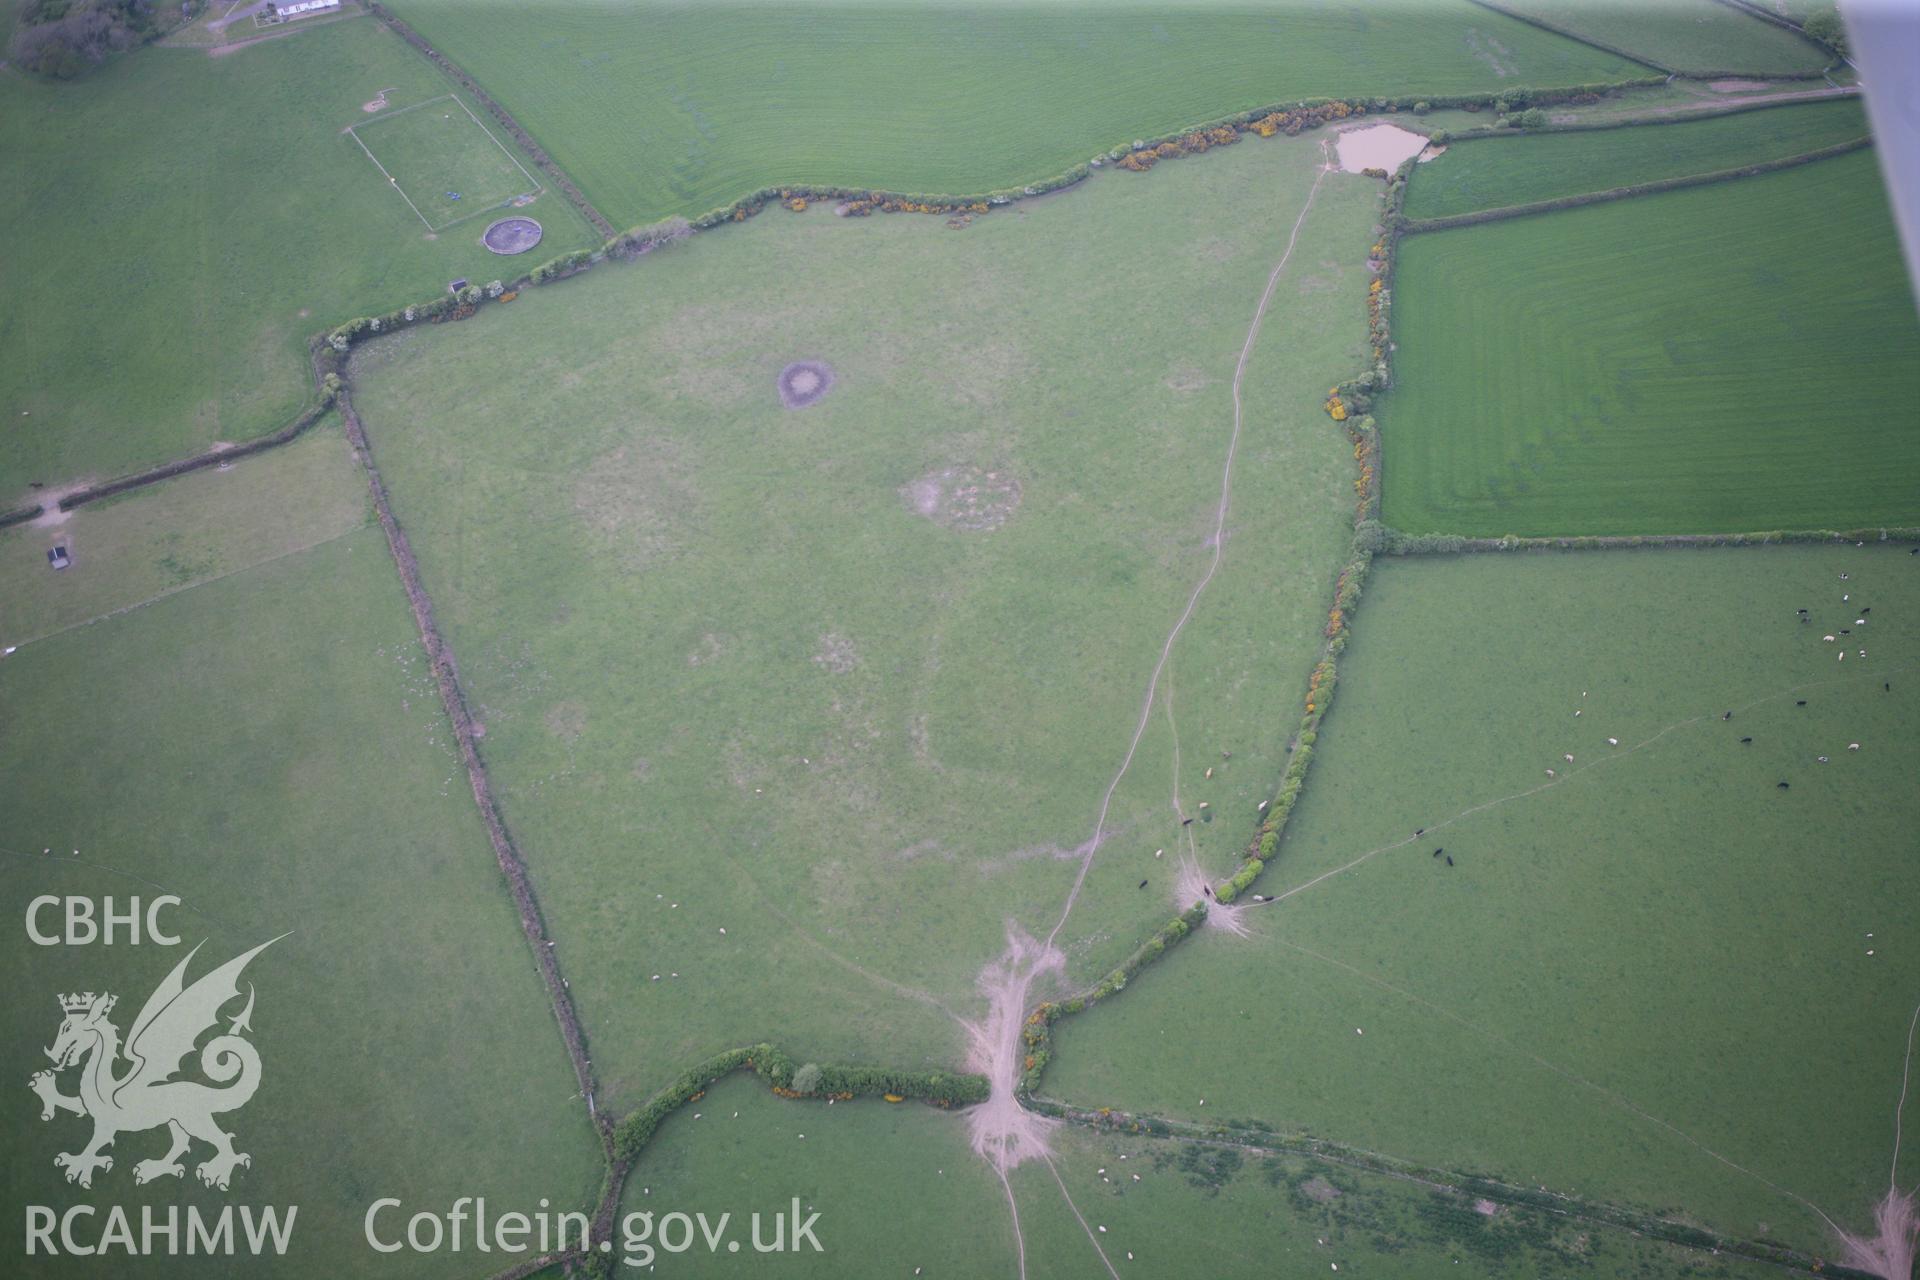 RCAHMW colour oblique photograph of Llanddewi enclosure. Taken by Toby Driver and Oliver Davies on 04/05/2011.